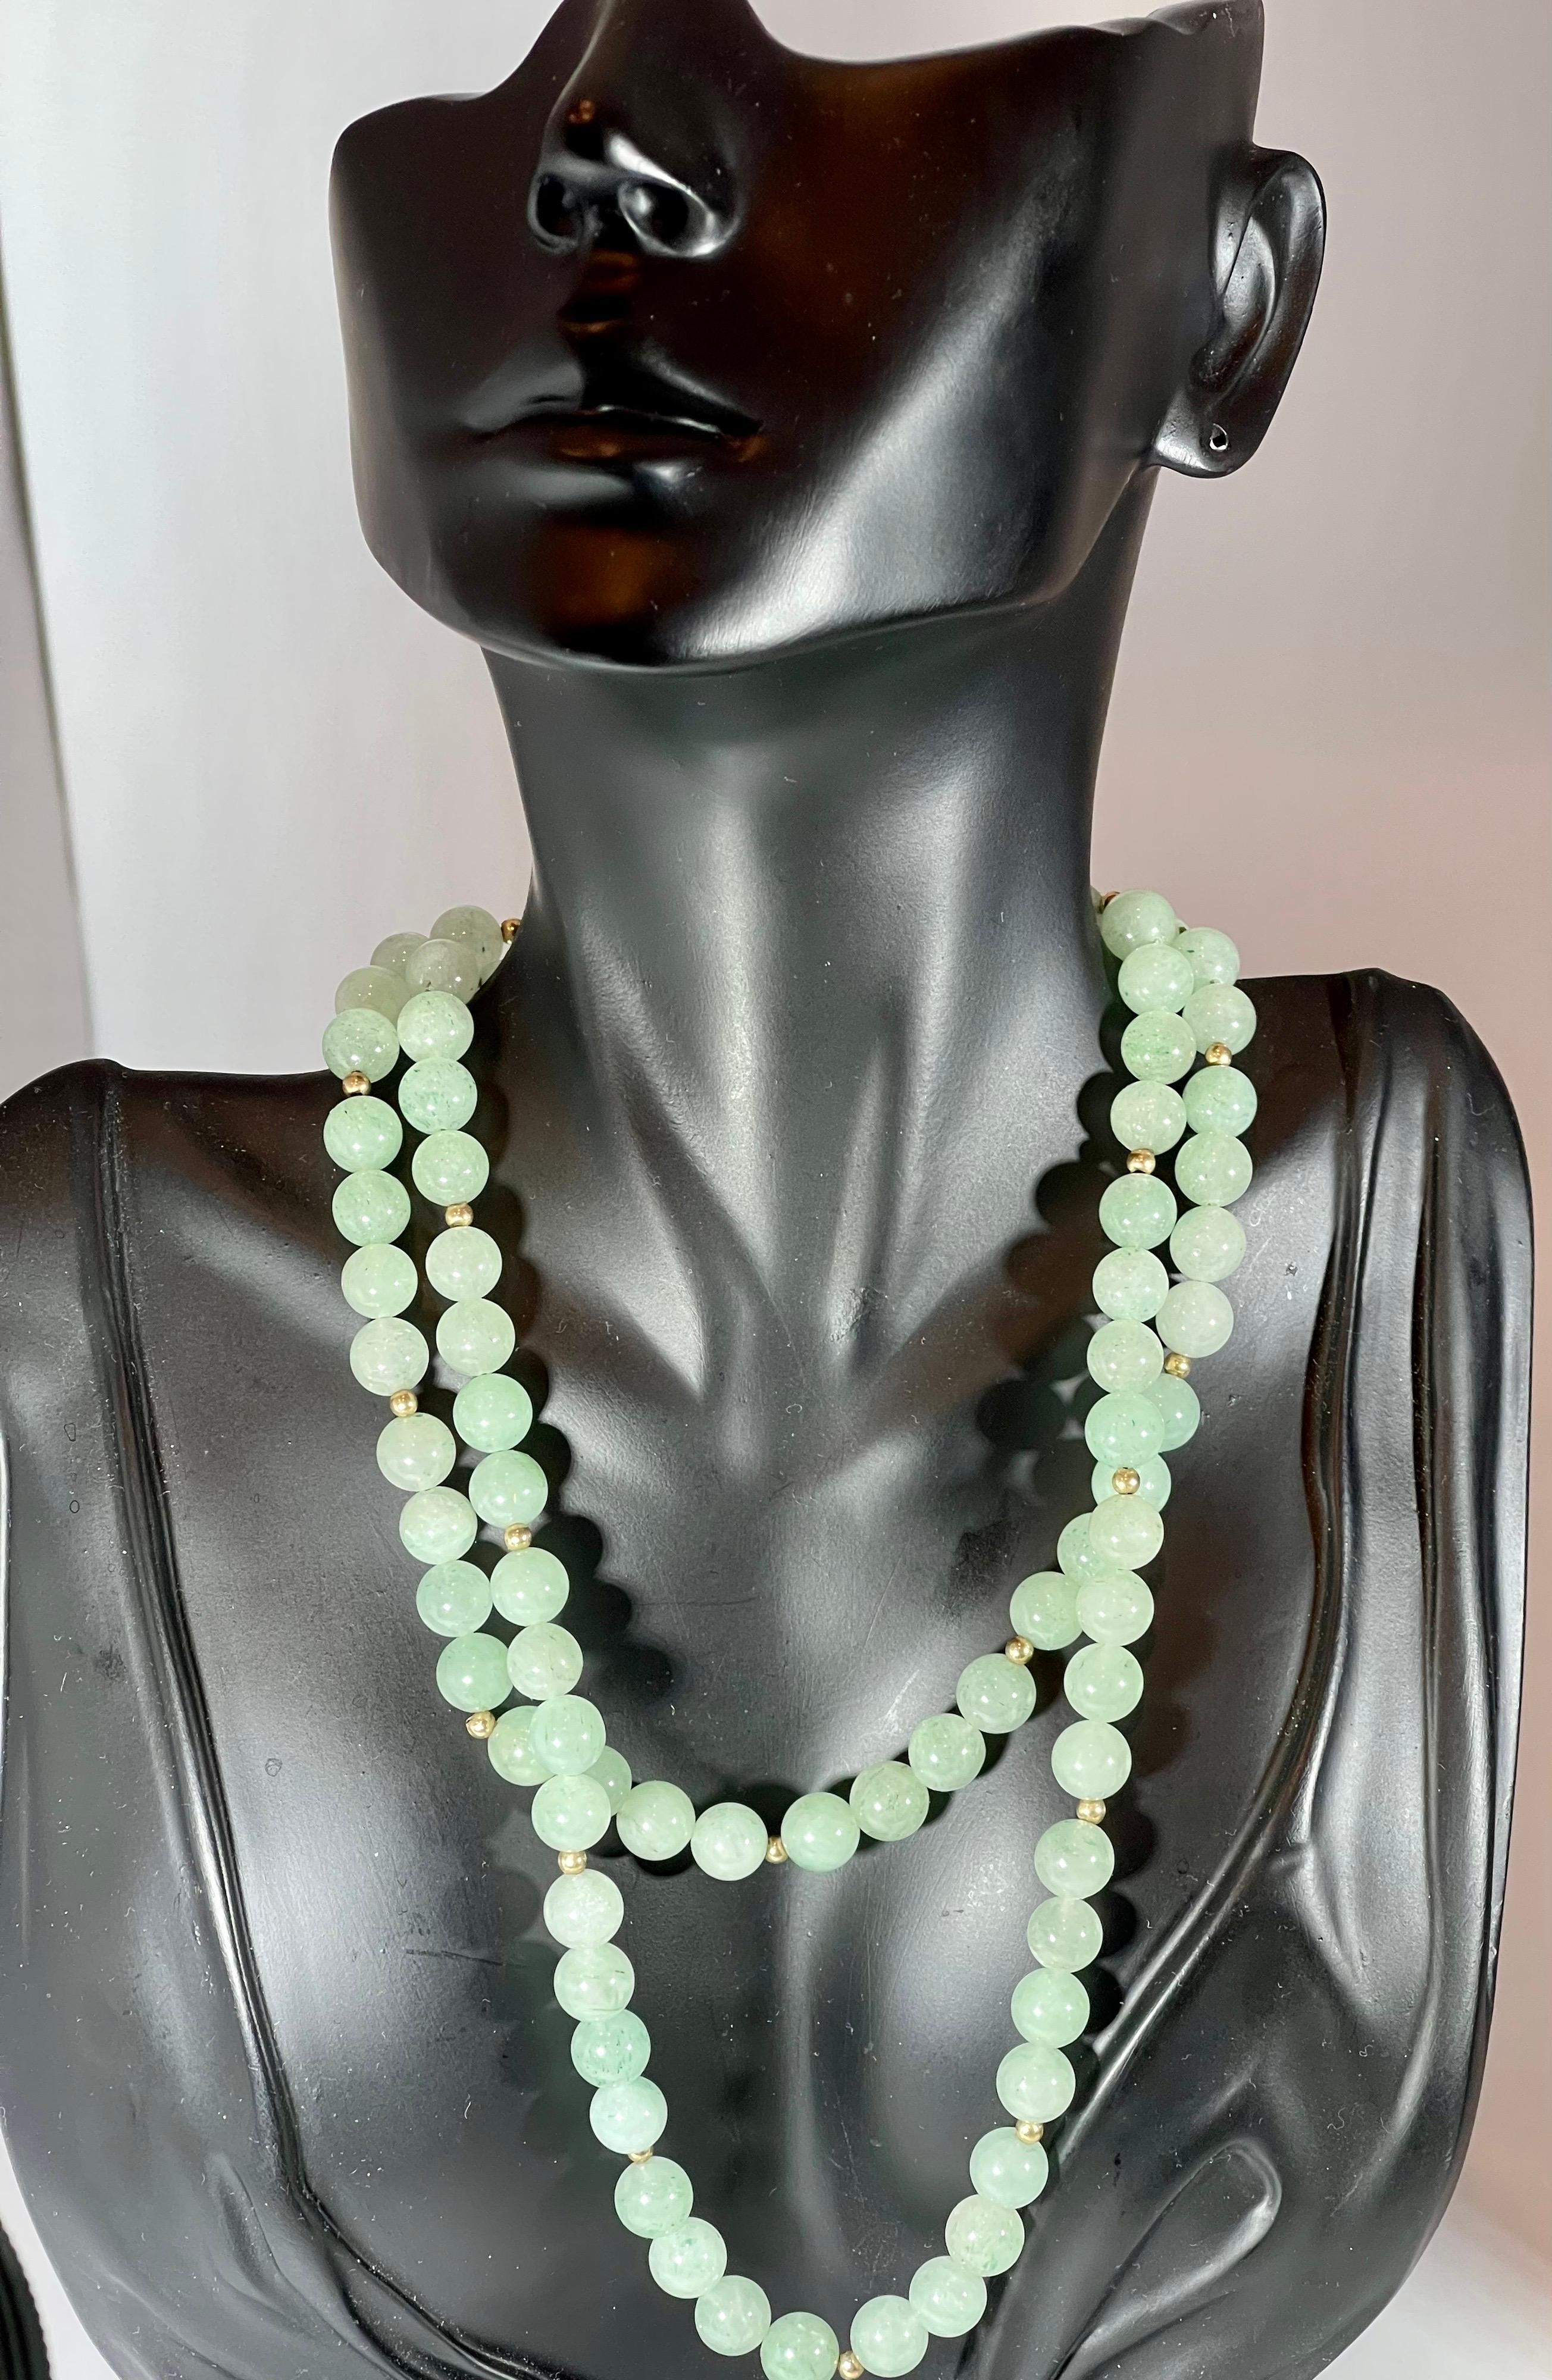 Grade A+ Green Quartz Crystal Bead Necklace 8.5 mm With 14 K Gold Beads, Genuine For Sale 2